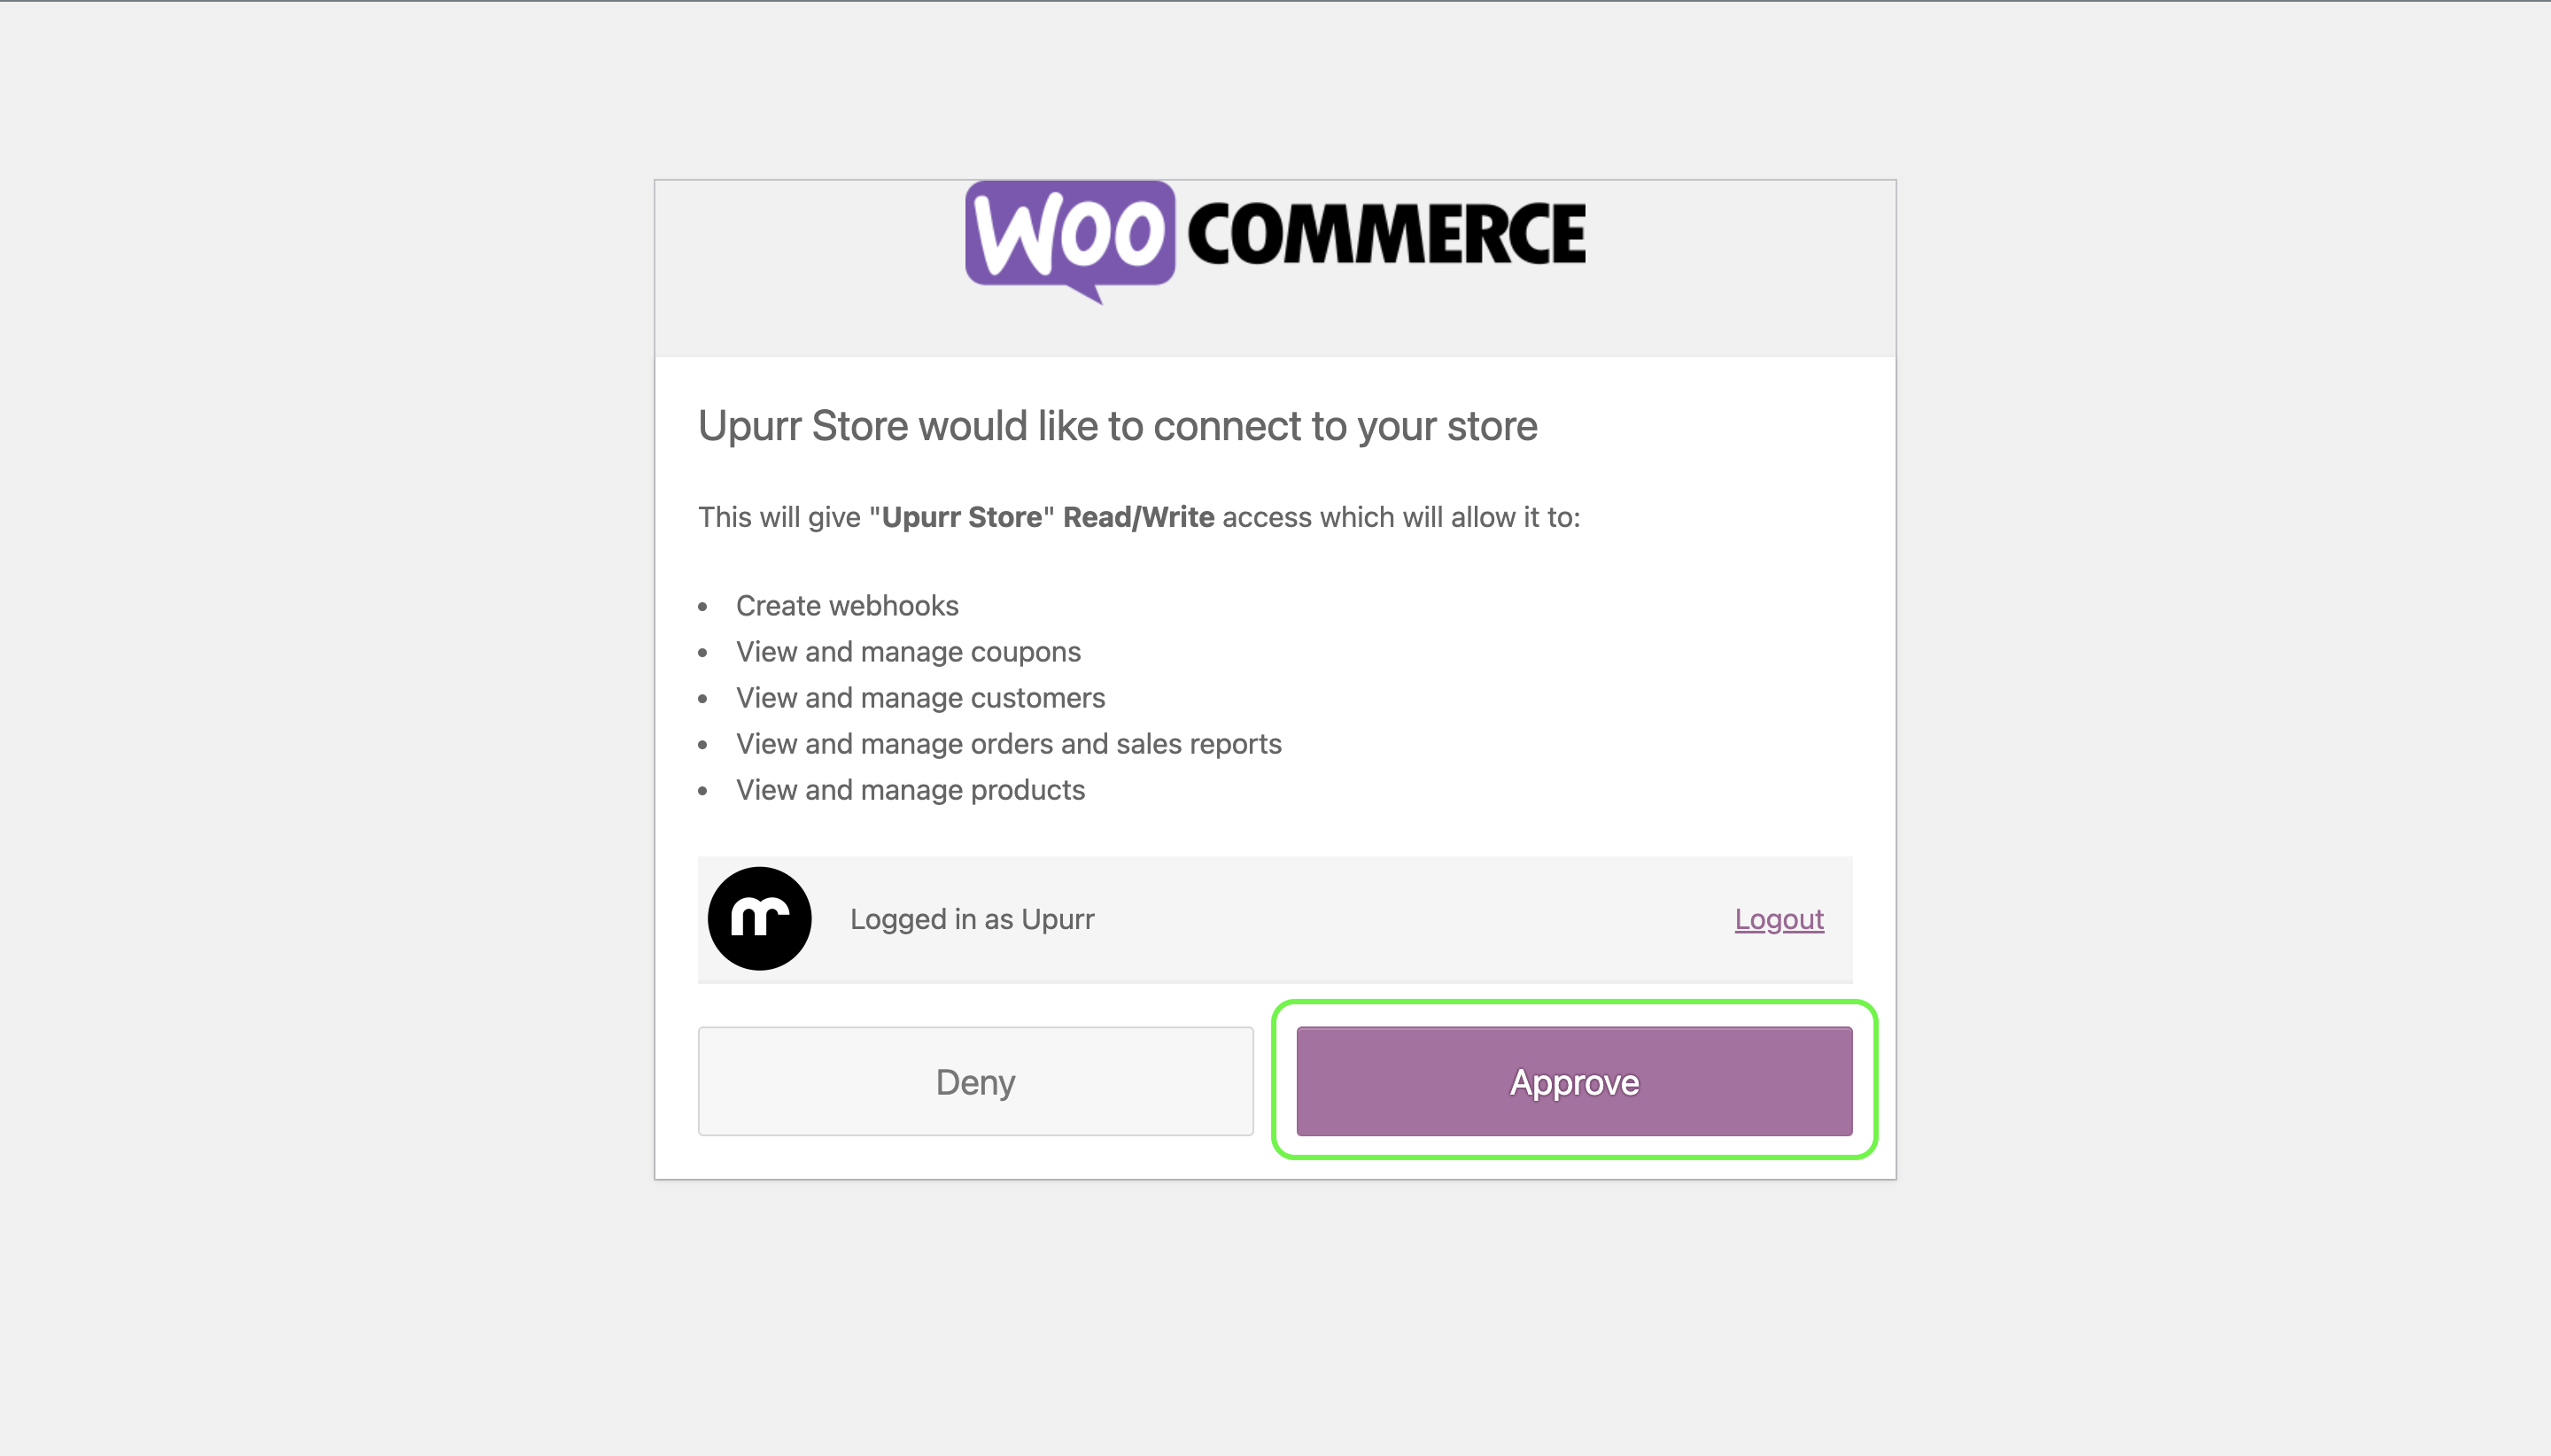 WooCommerce Upurr Store Approve